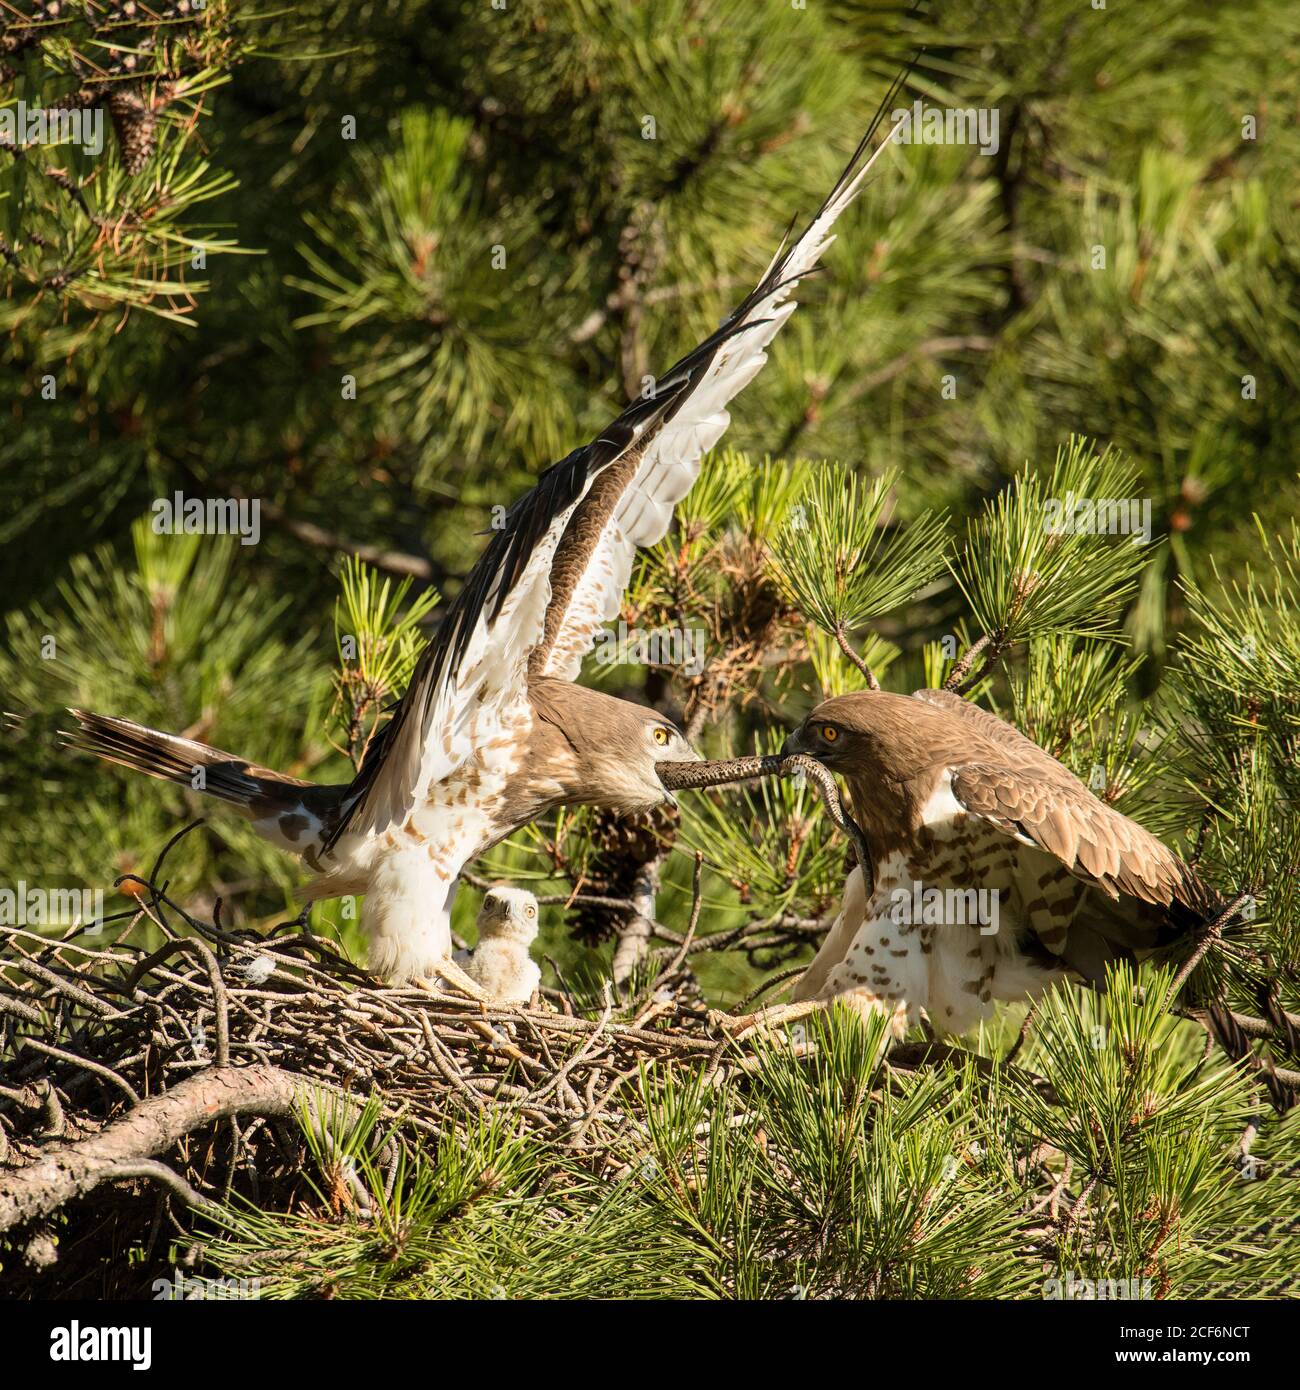 Furious wild eagle fighting for a snake in nest between coniferous twigs Stock Photo